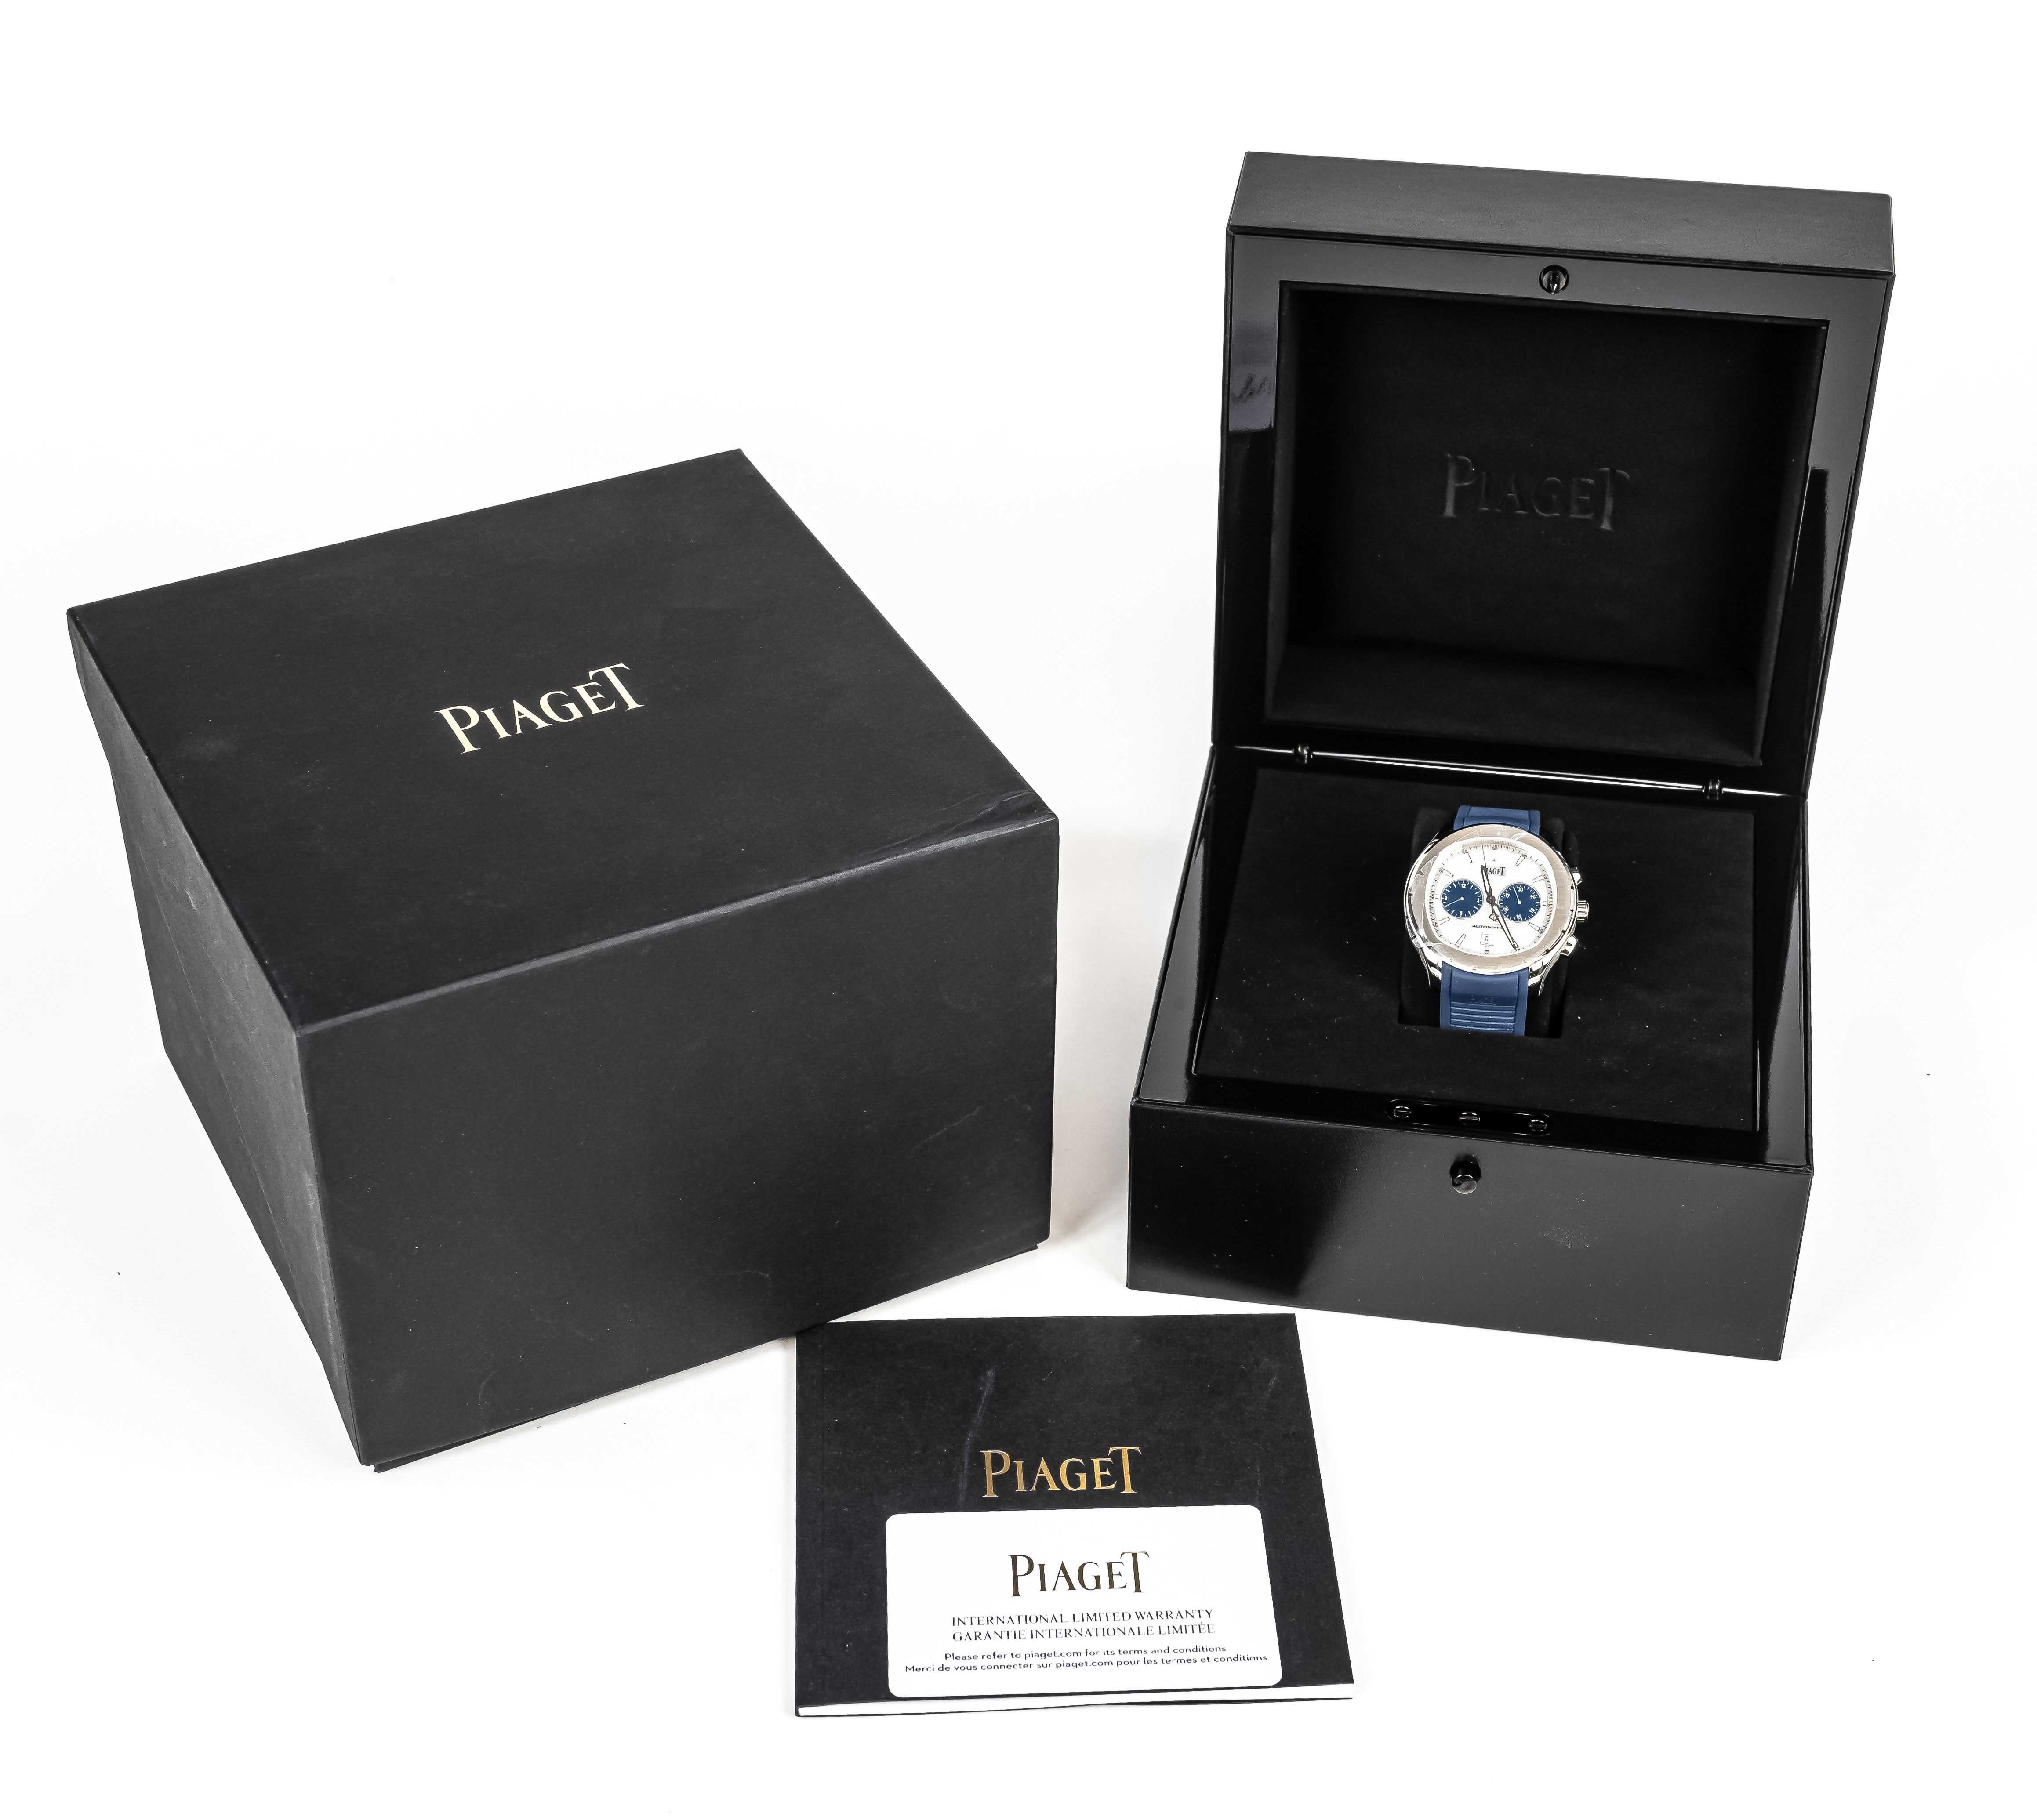 Piaget Polo S, chronograph, automatic with 50 hours power reserve, satin and polished steel case - Image 3 of 3